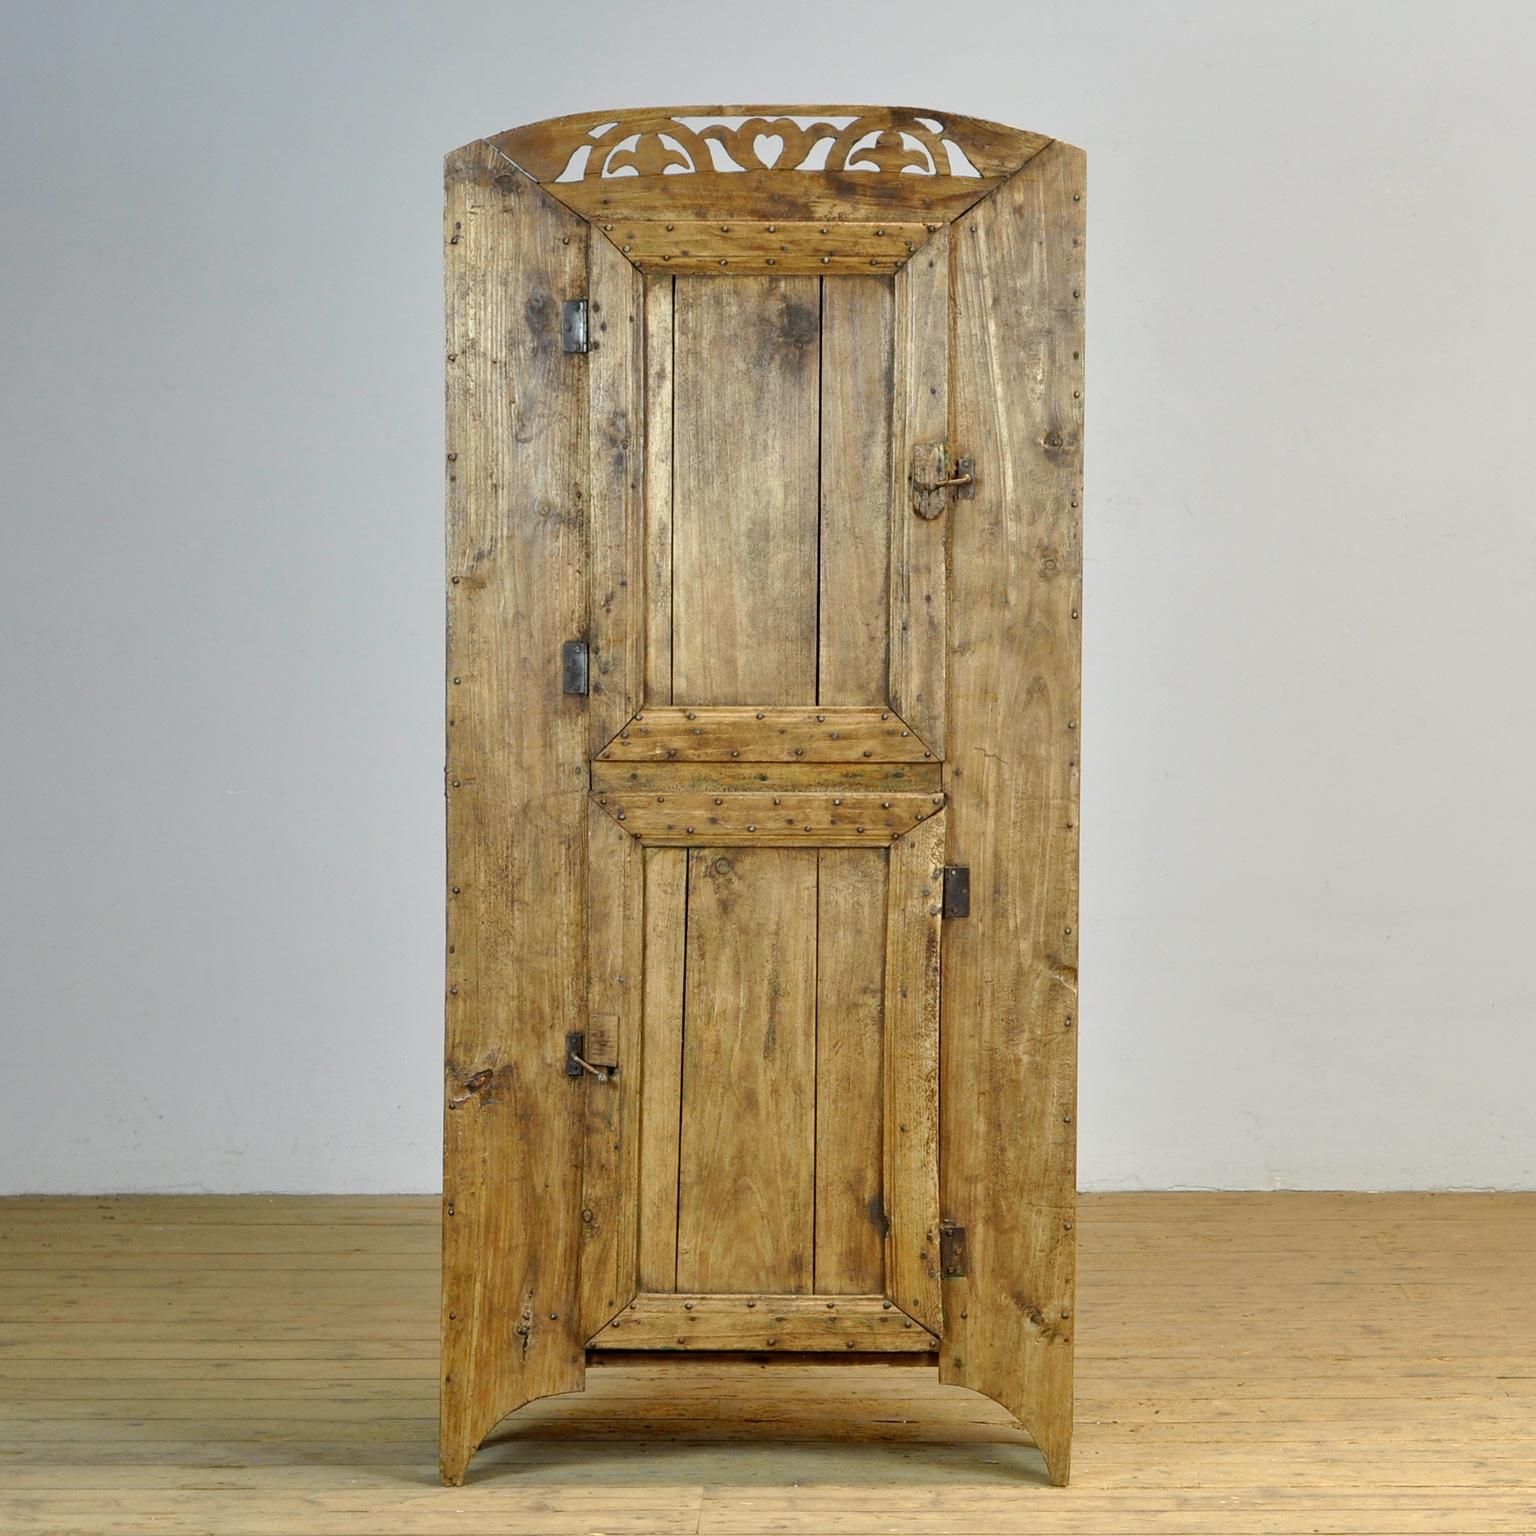 Rare primitively made cupboard, Carpathians, circa 1850, early construction, constructed from sawn or hewn beech wood. The cabinet consists of two compartments. The doors open to the left and right. A nice detail are the nails that have been used.